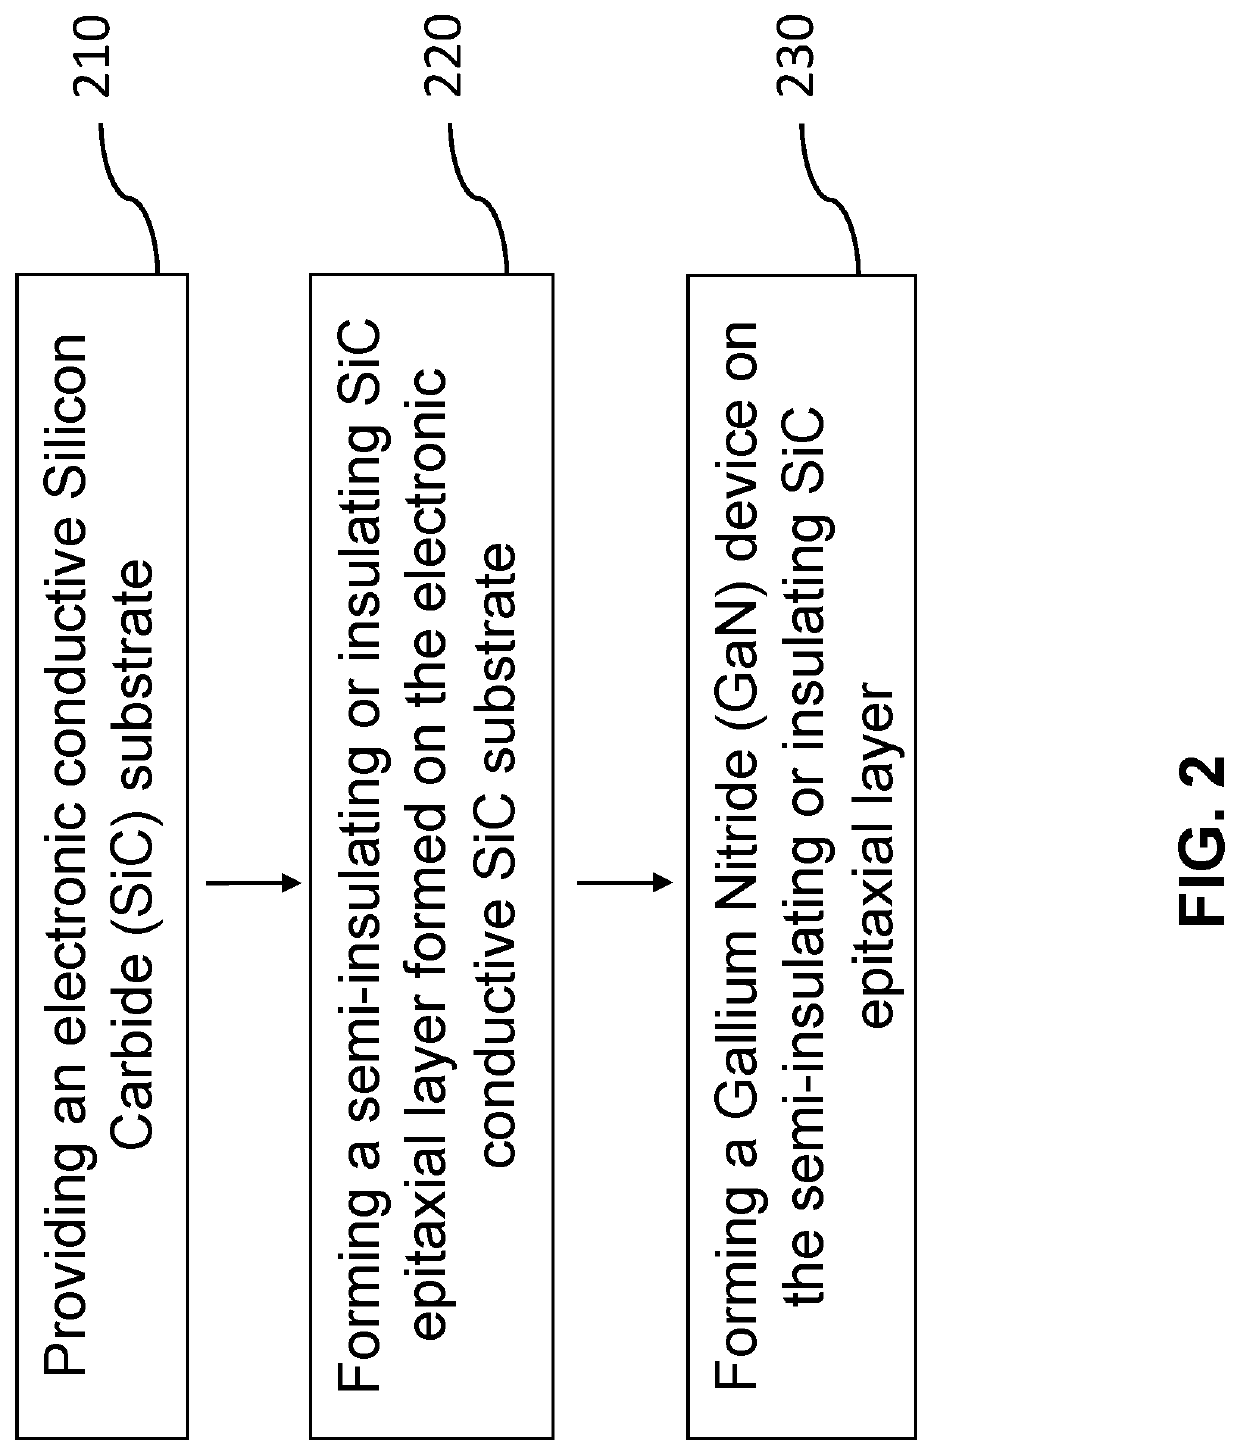 Composite substrates of conductive and insulating or semi-insulating silicon carbide for gallium nitride devices